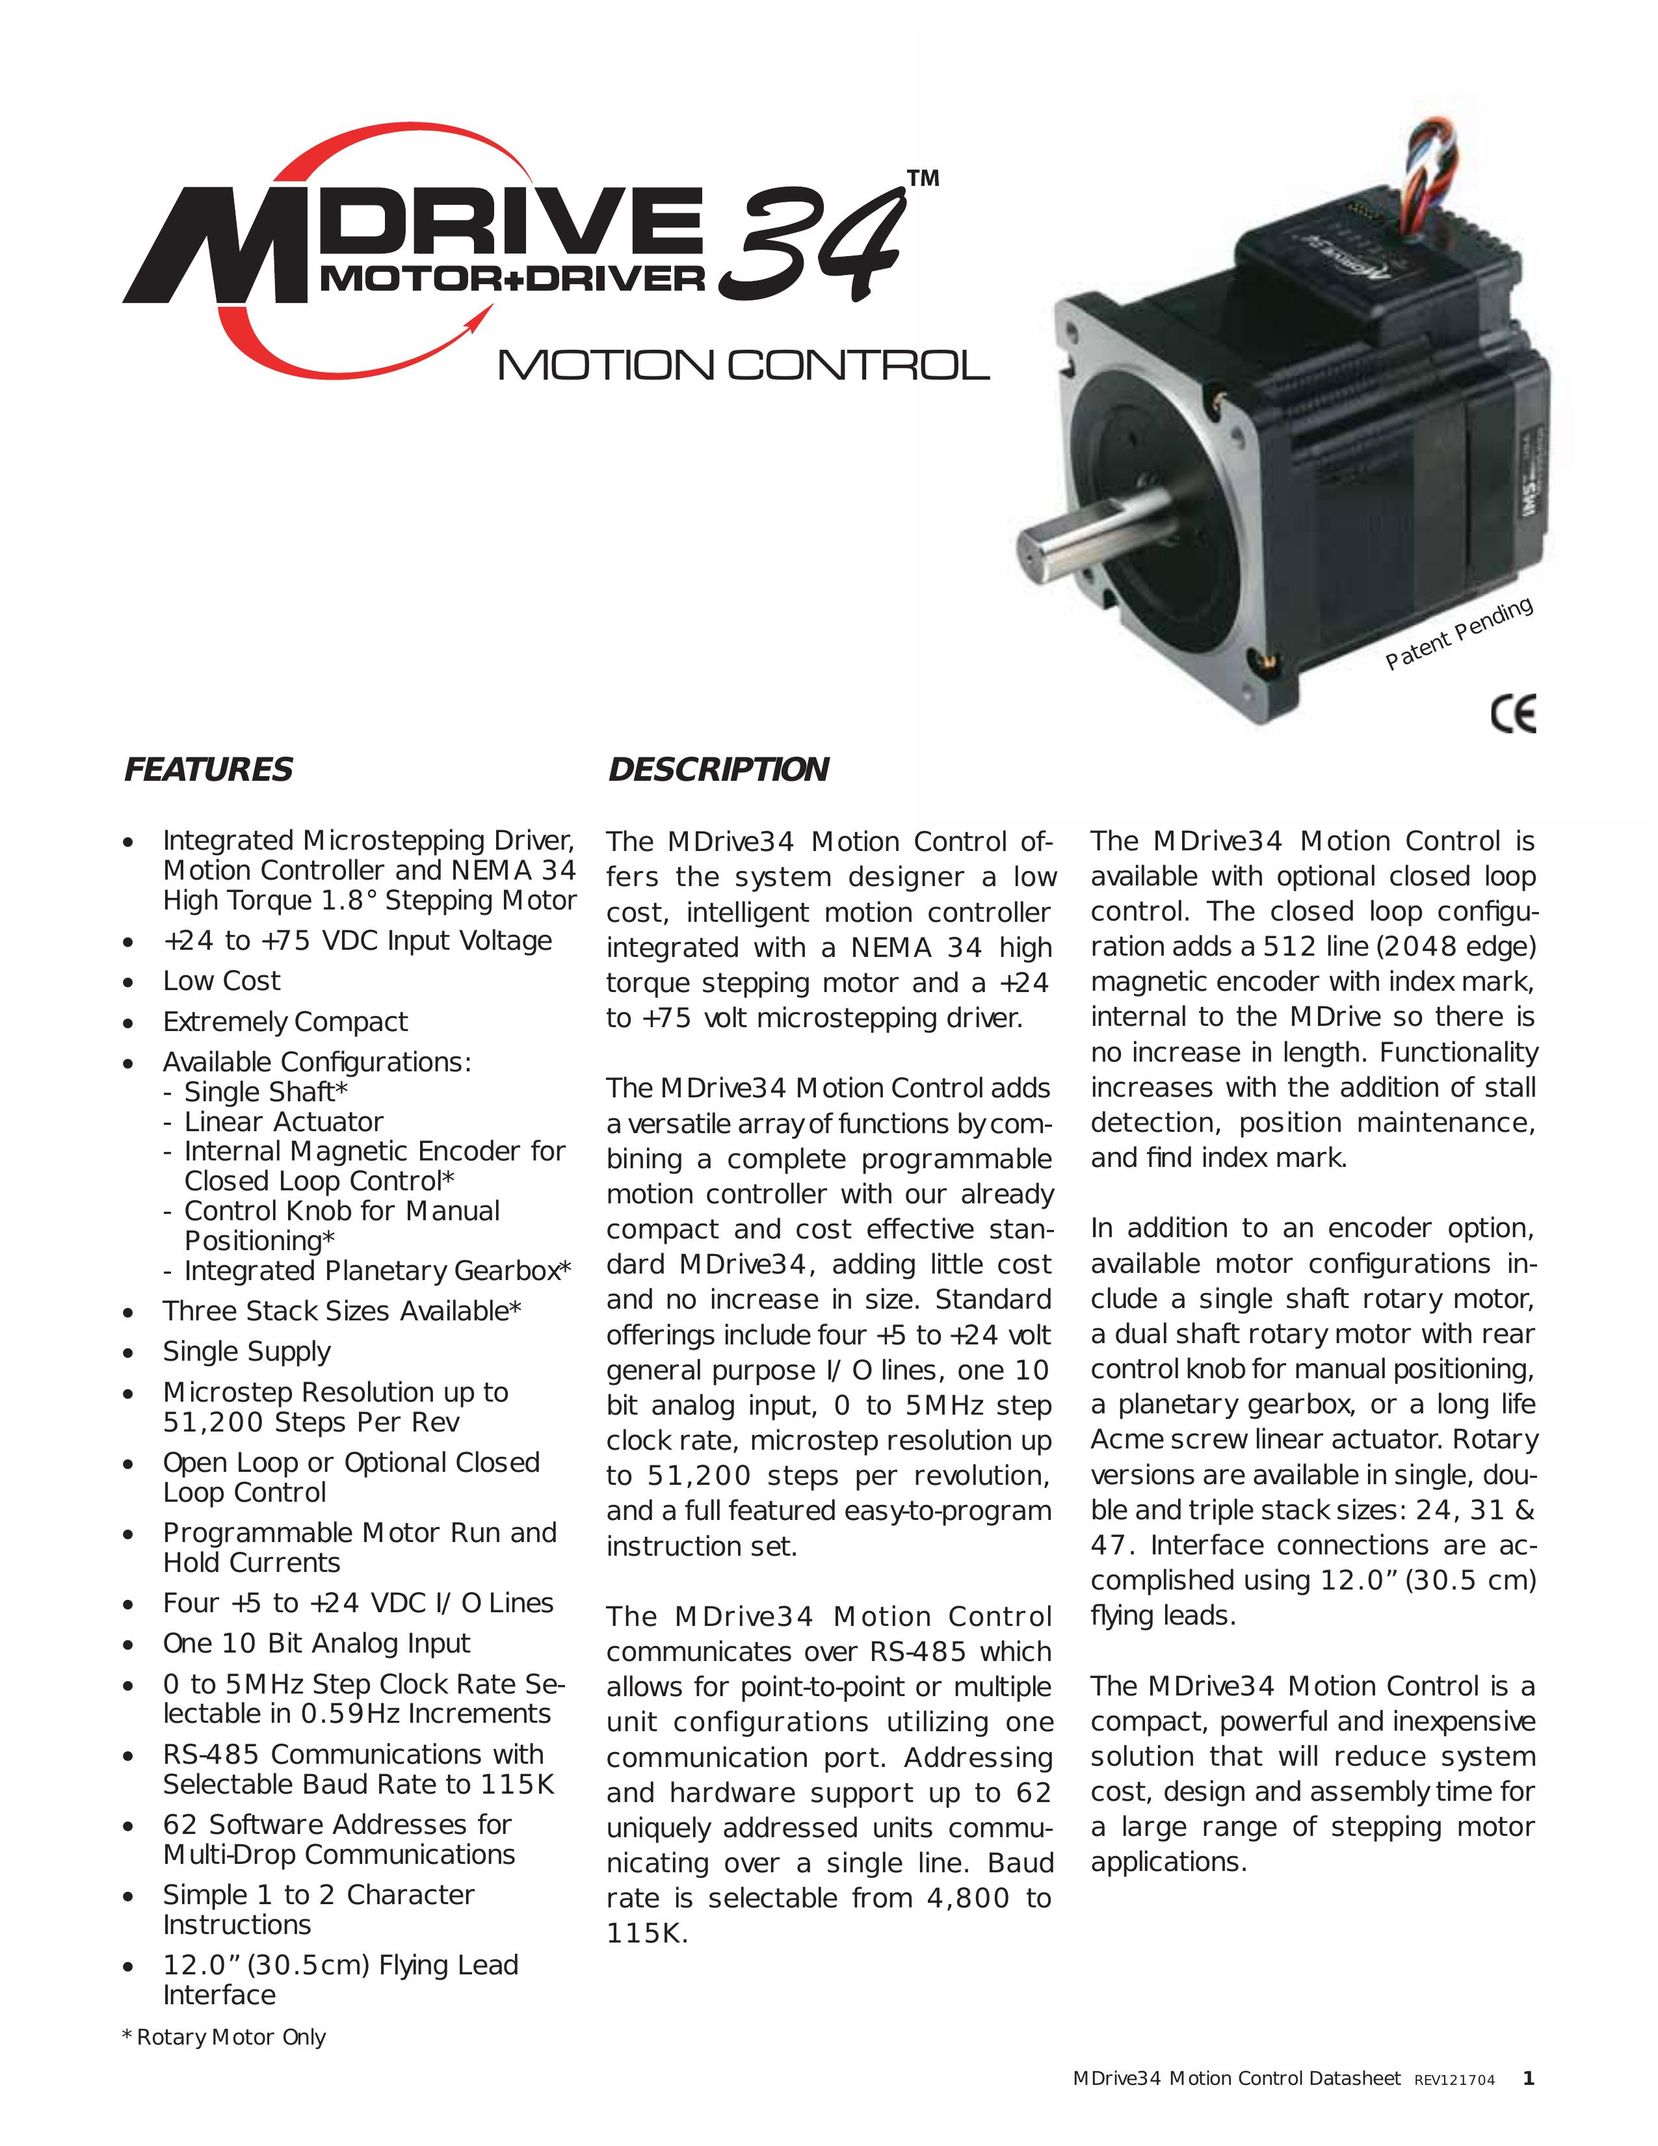 Intelligent Motion Systems MDrive34 Home Safety Product User Manual